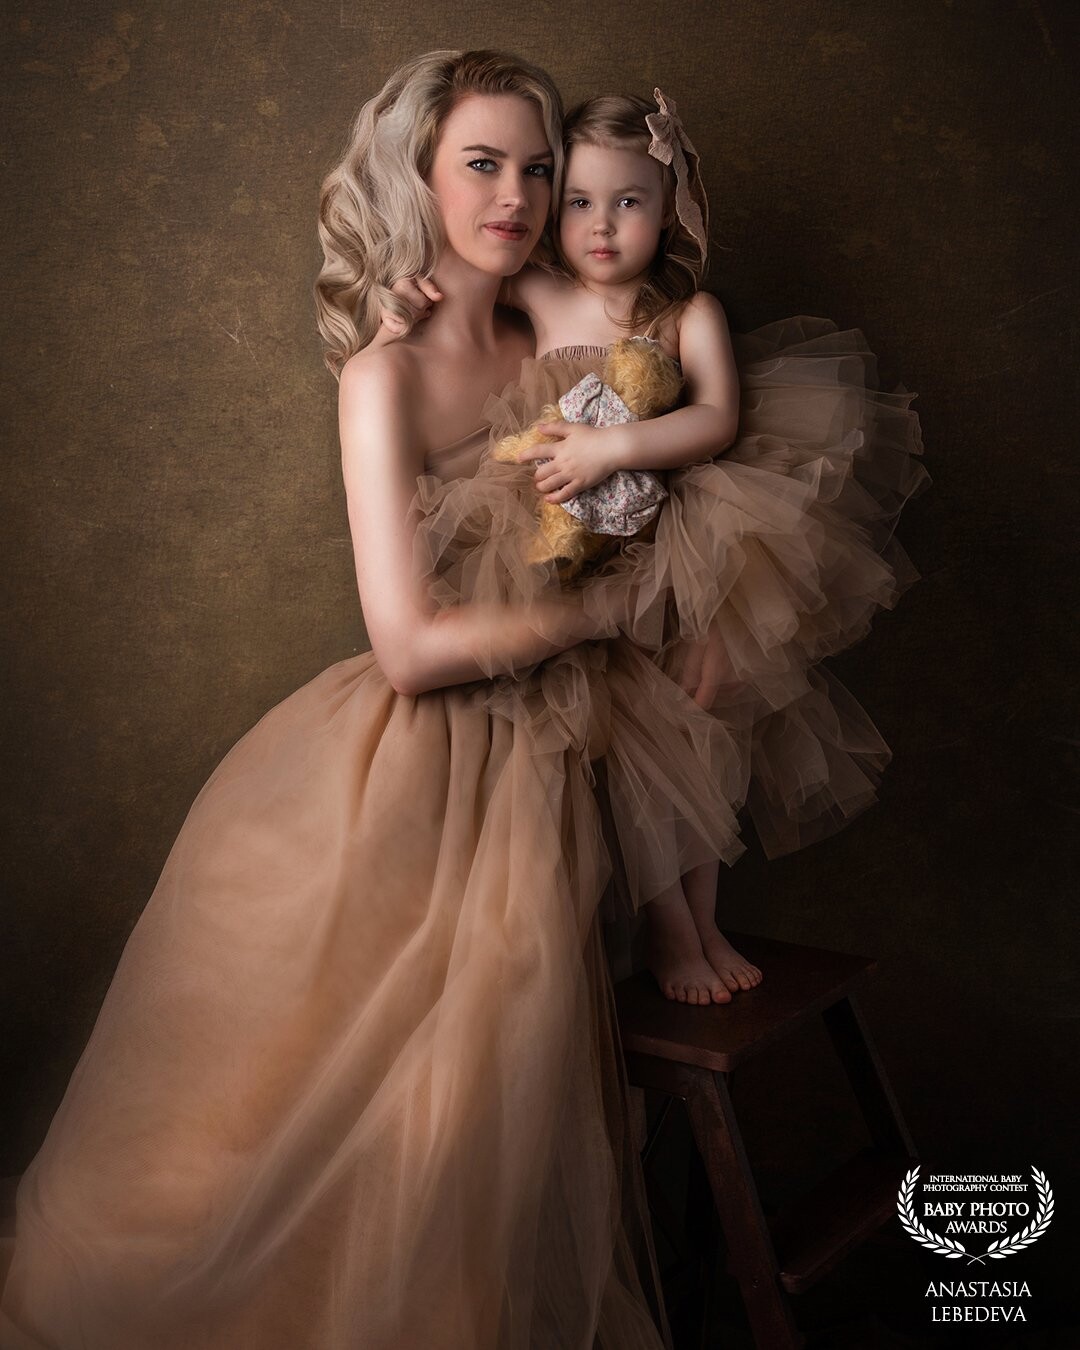 In this photo, mother and daughter. I photographed the baby four years ago when she was a newborn. I am very pleased that my clients come back to me again. I love my job.